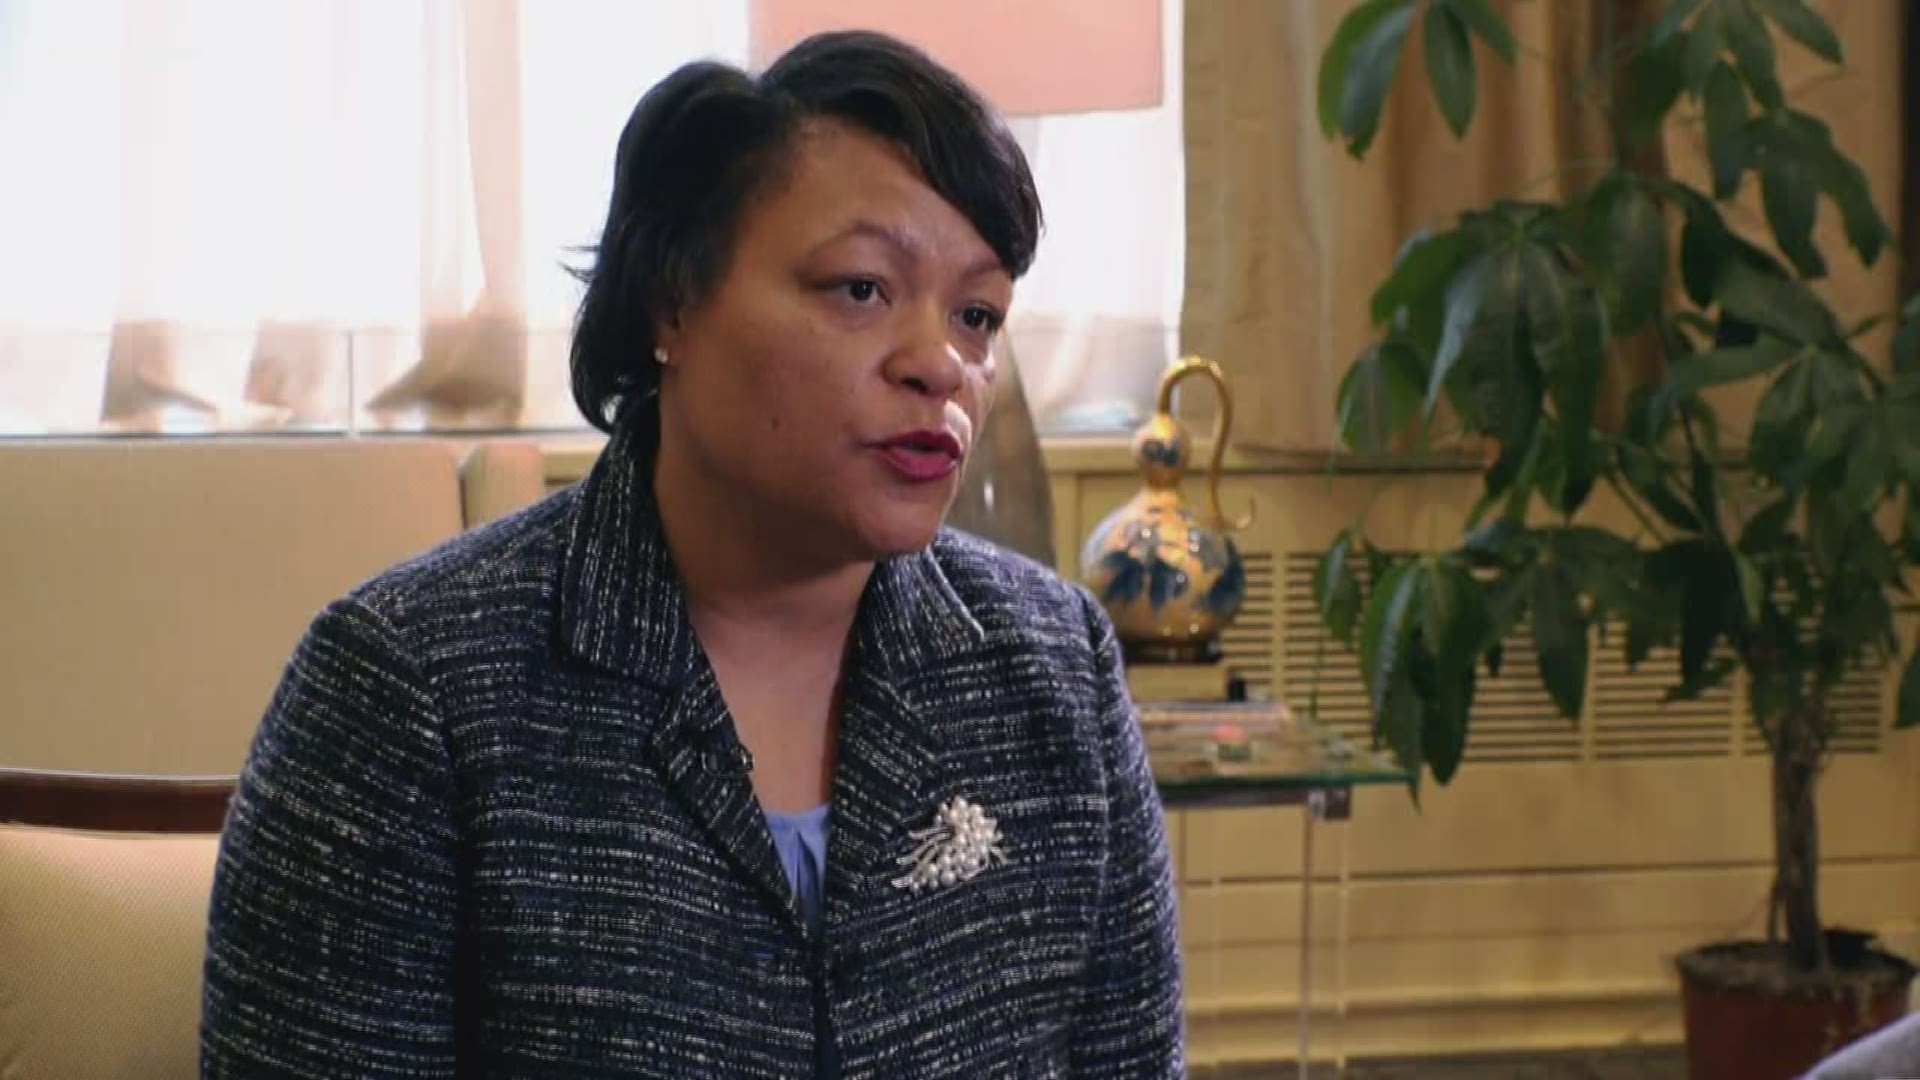 Mayor LaToya Cantrell said that the city of New Orleans has been getting by on one-time money that won't always be there.